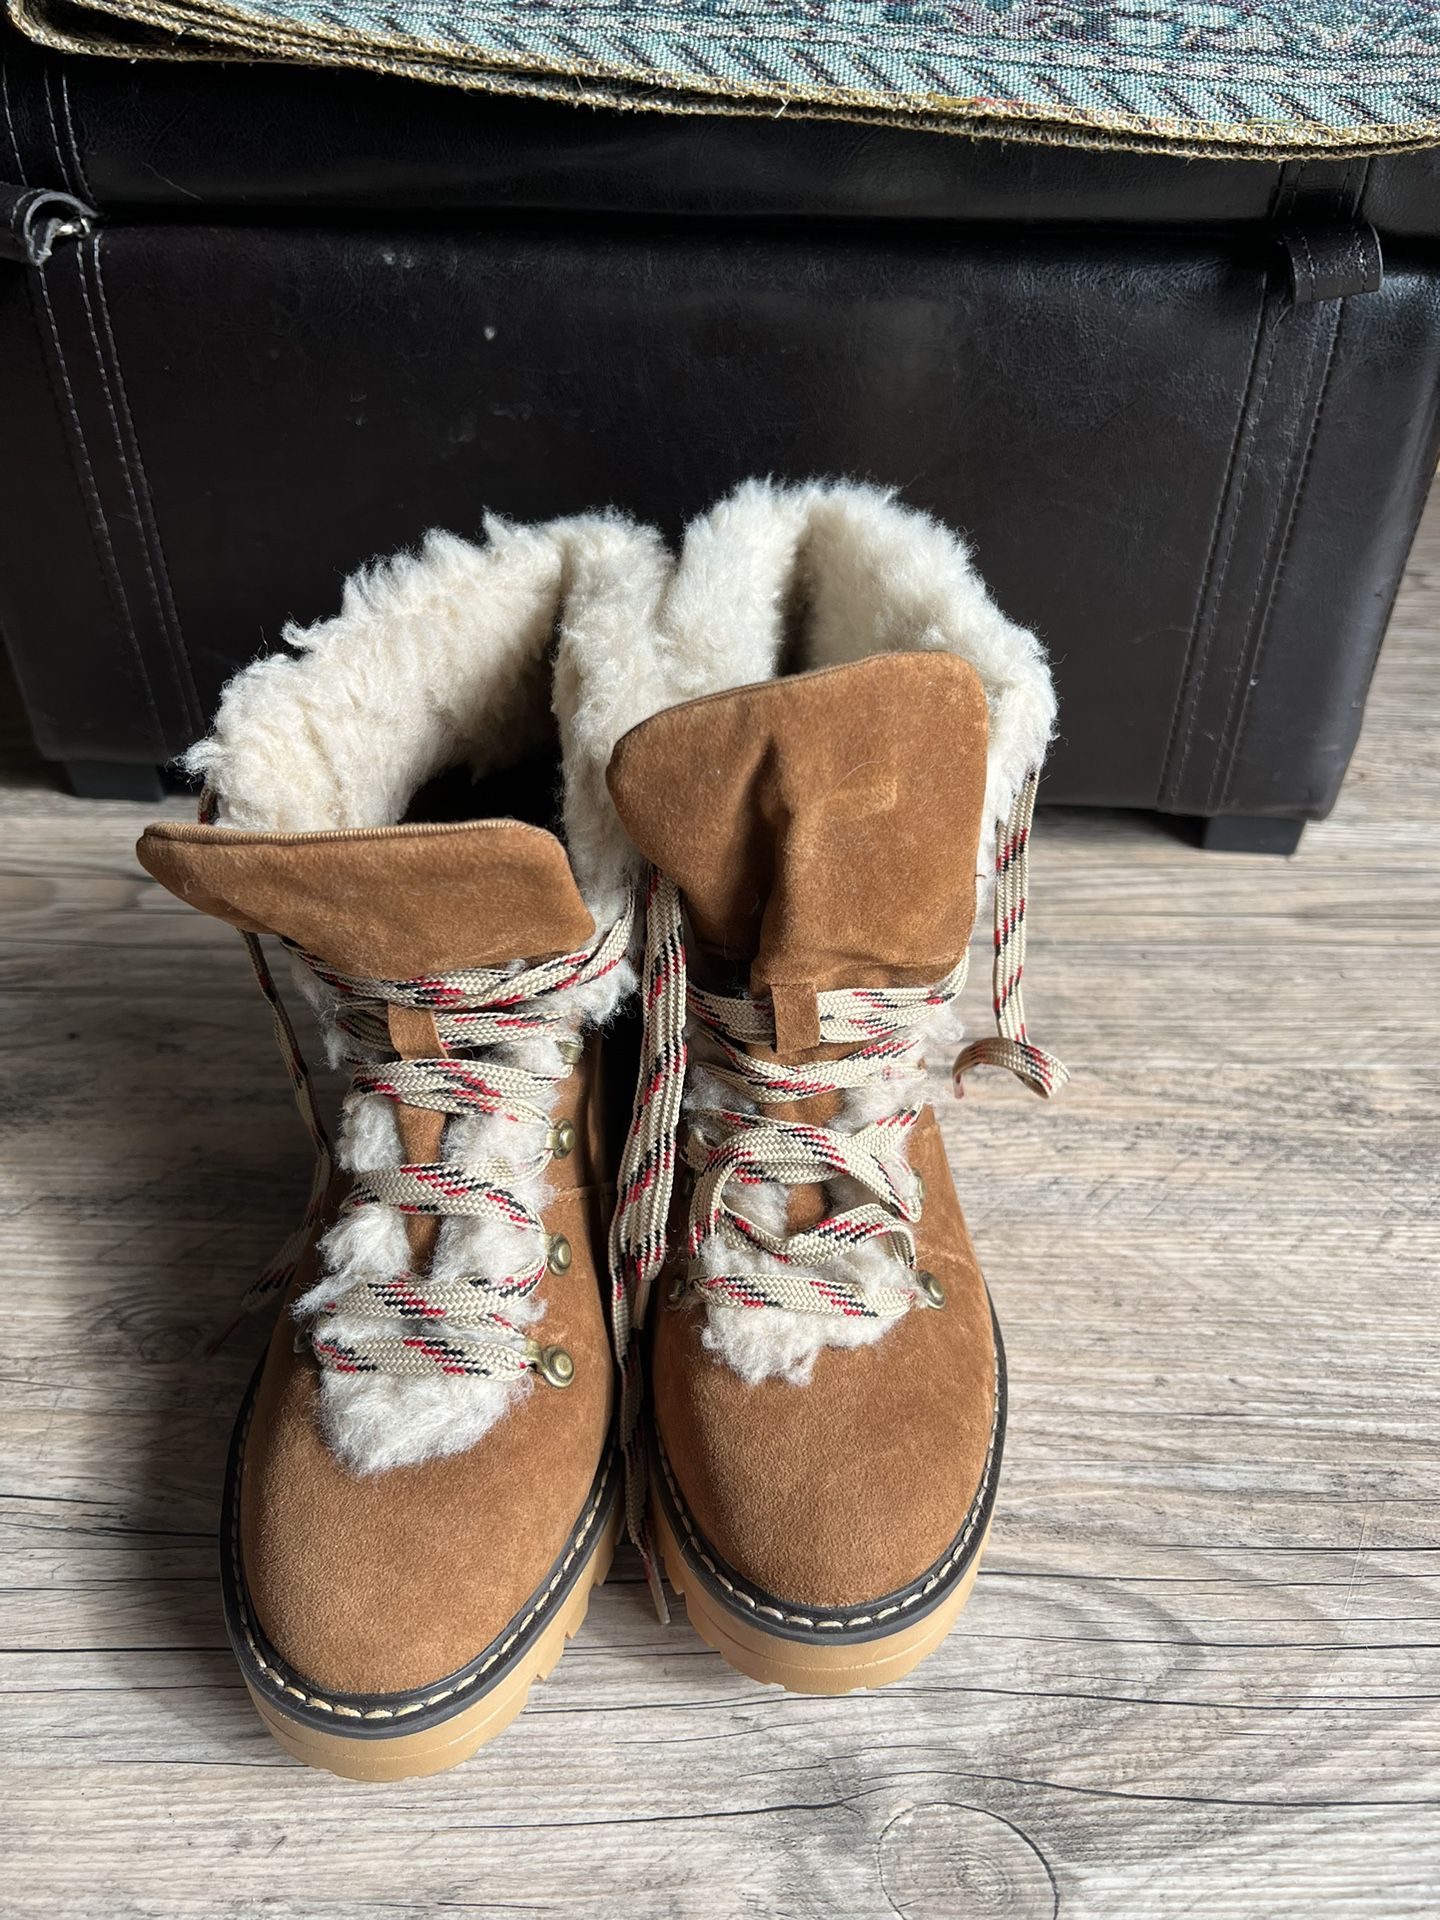 TIME and TRU Women’s Cozy Hiker Boots sz 7 